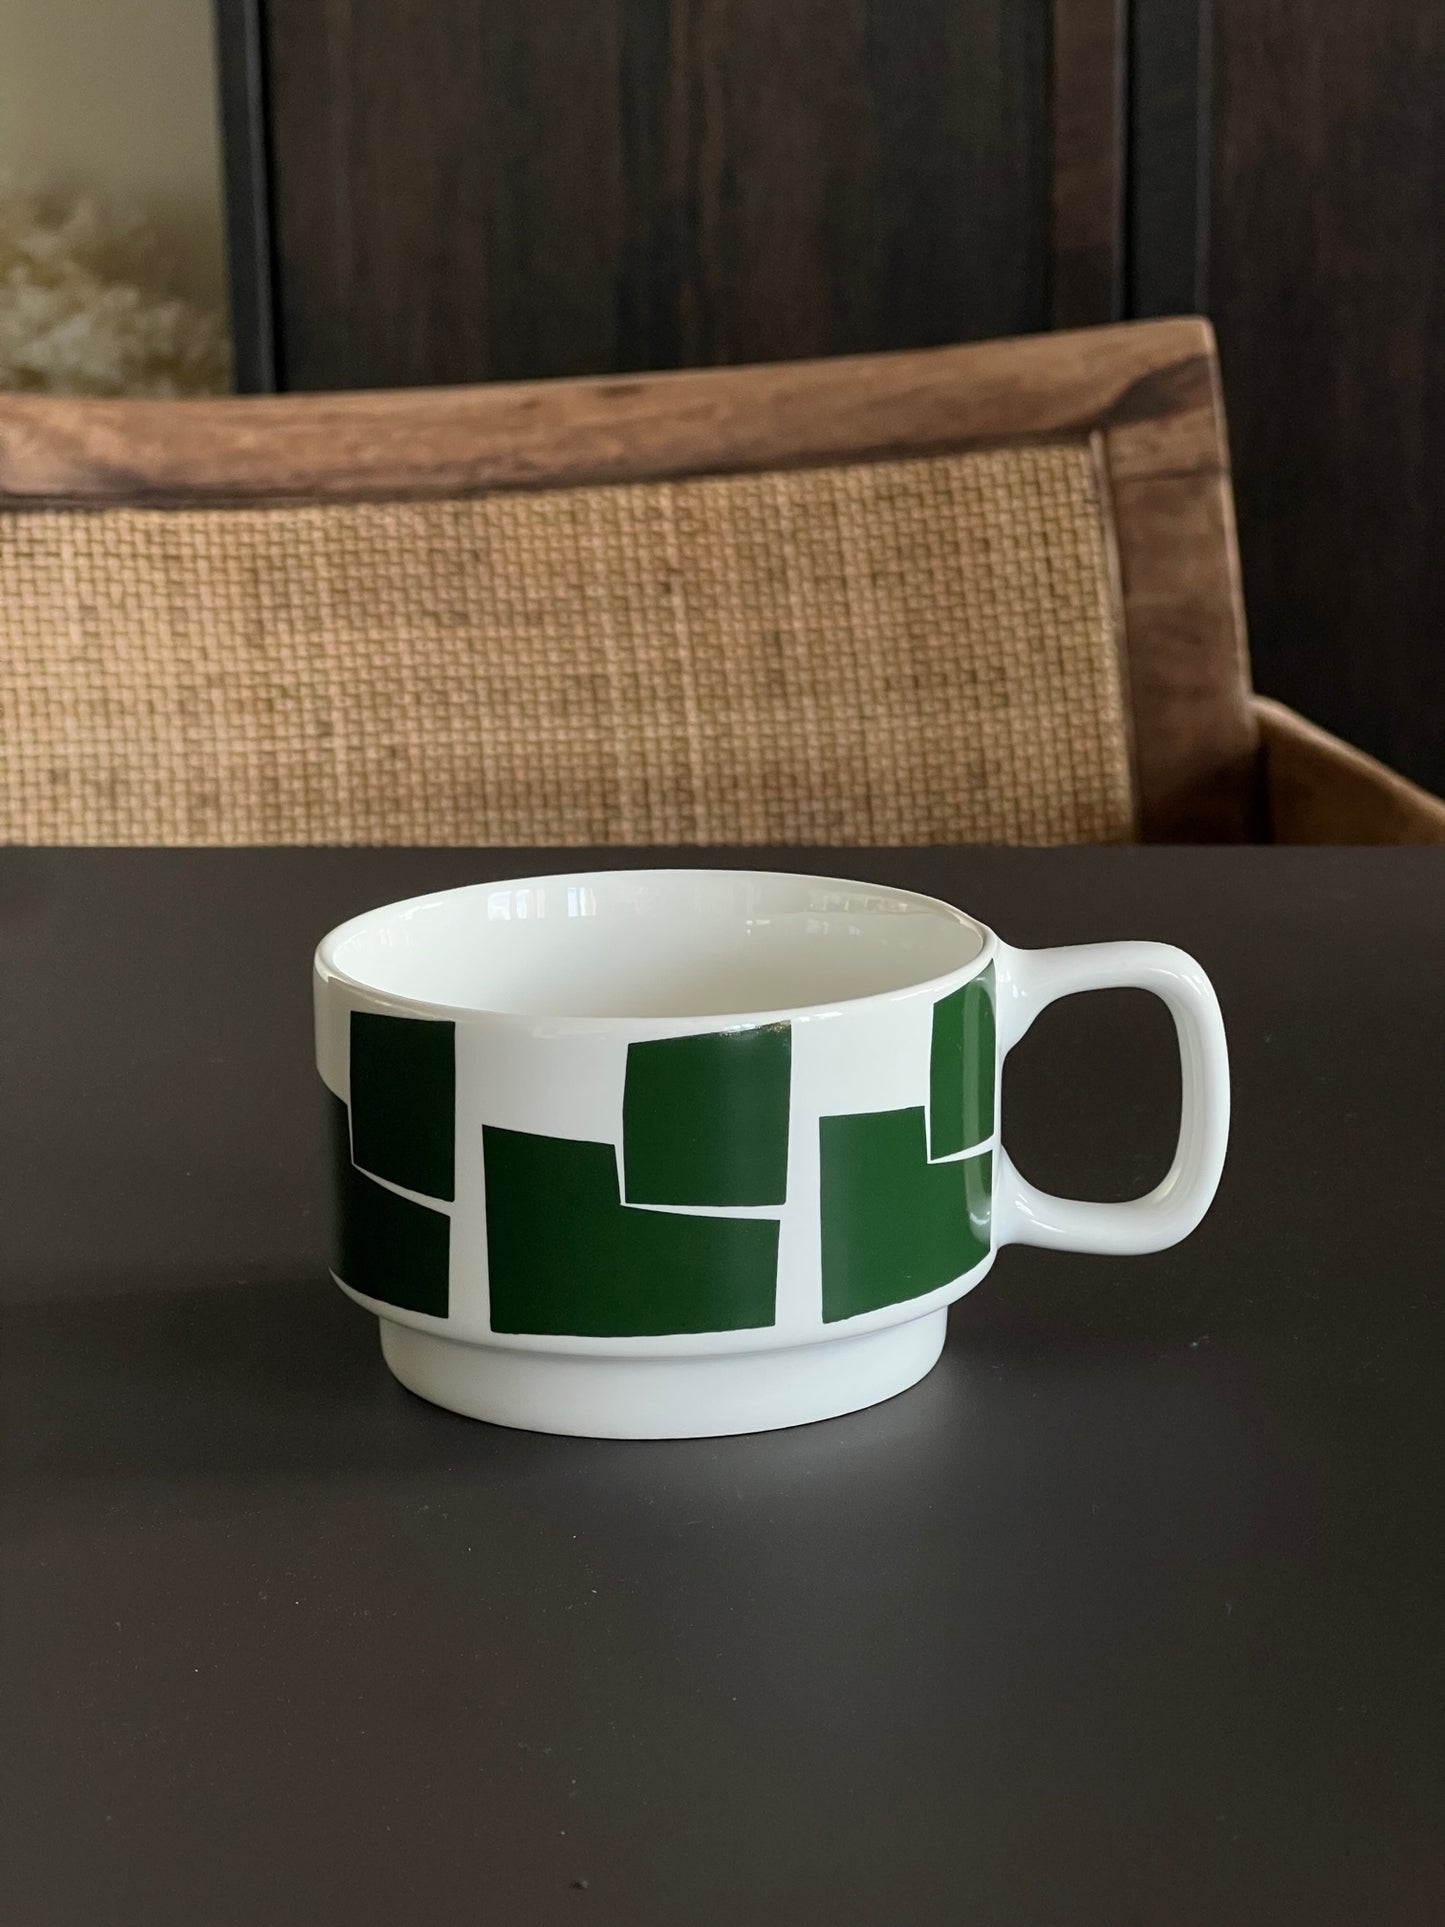 Sisi cup, green graphic design